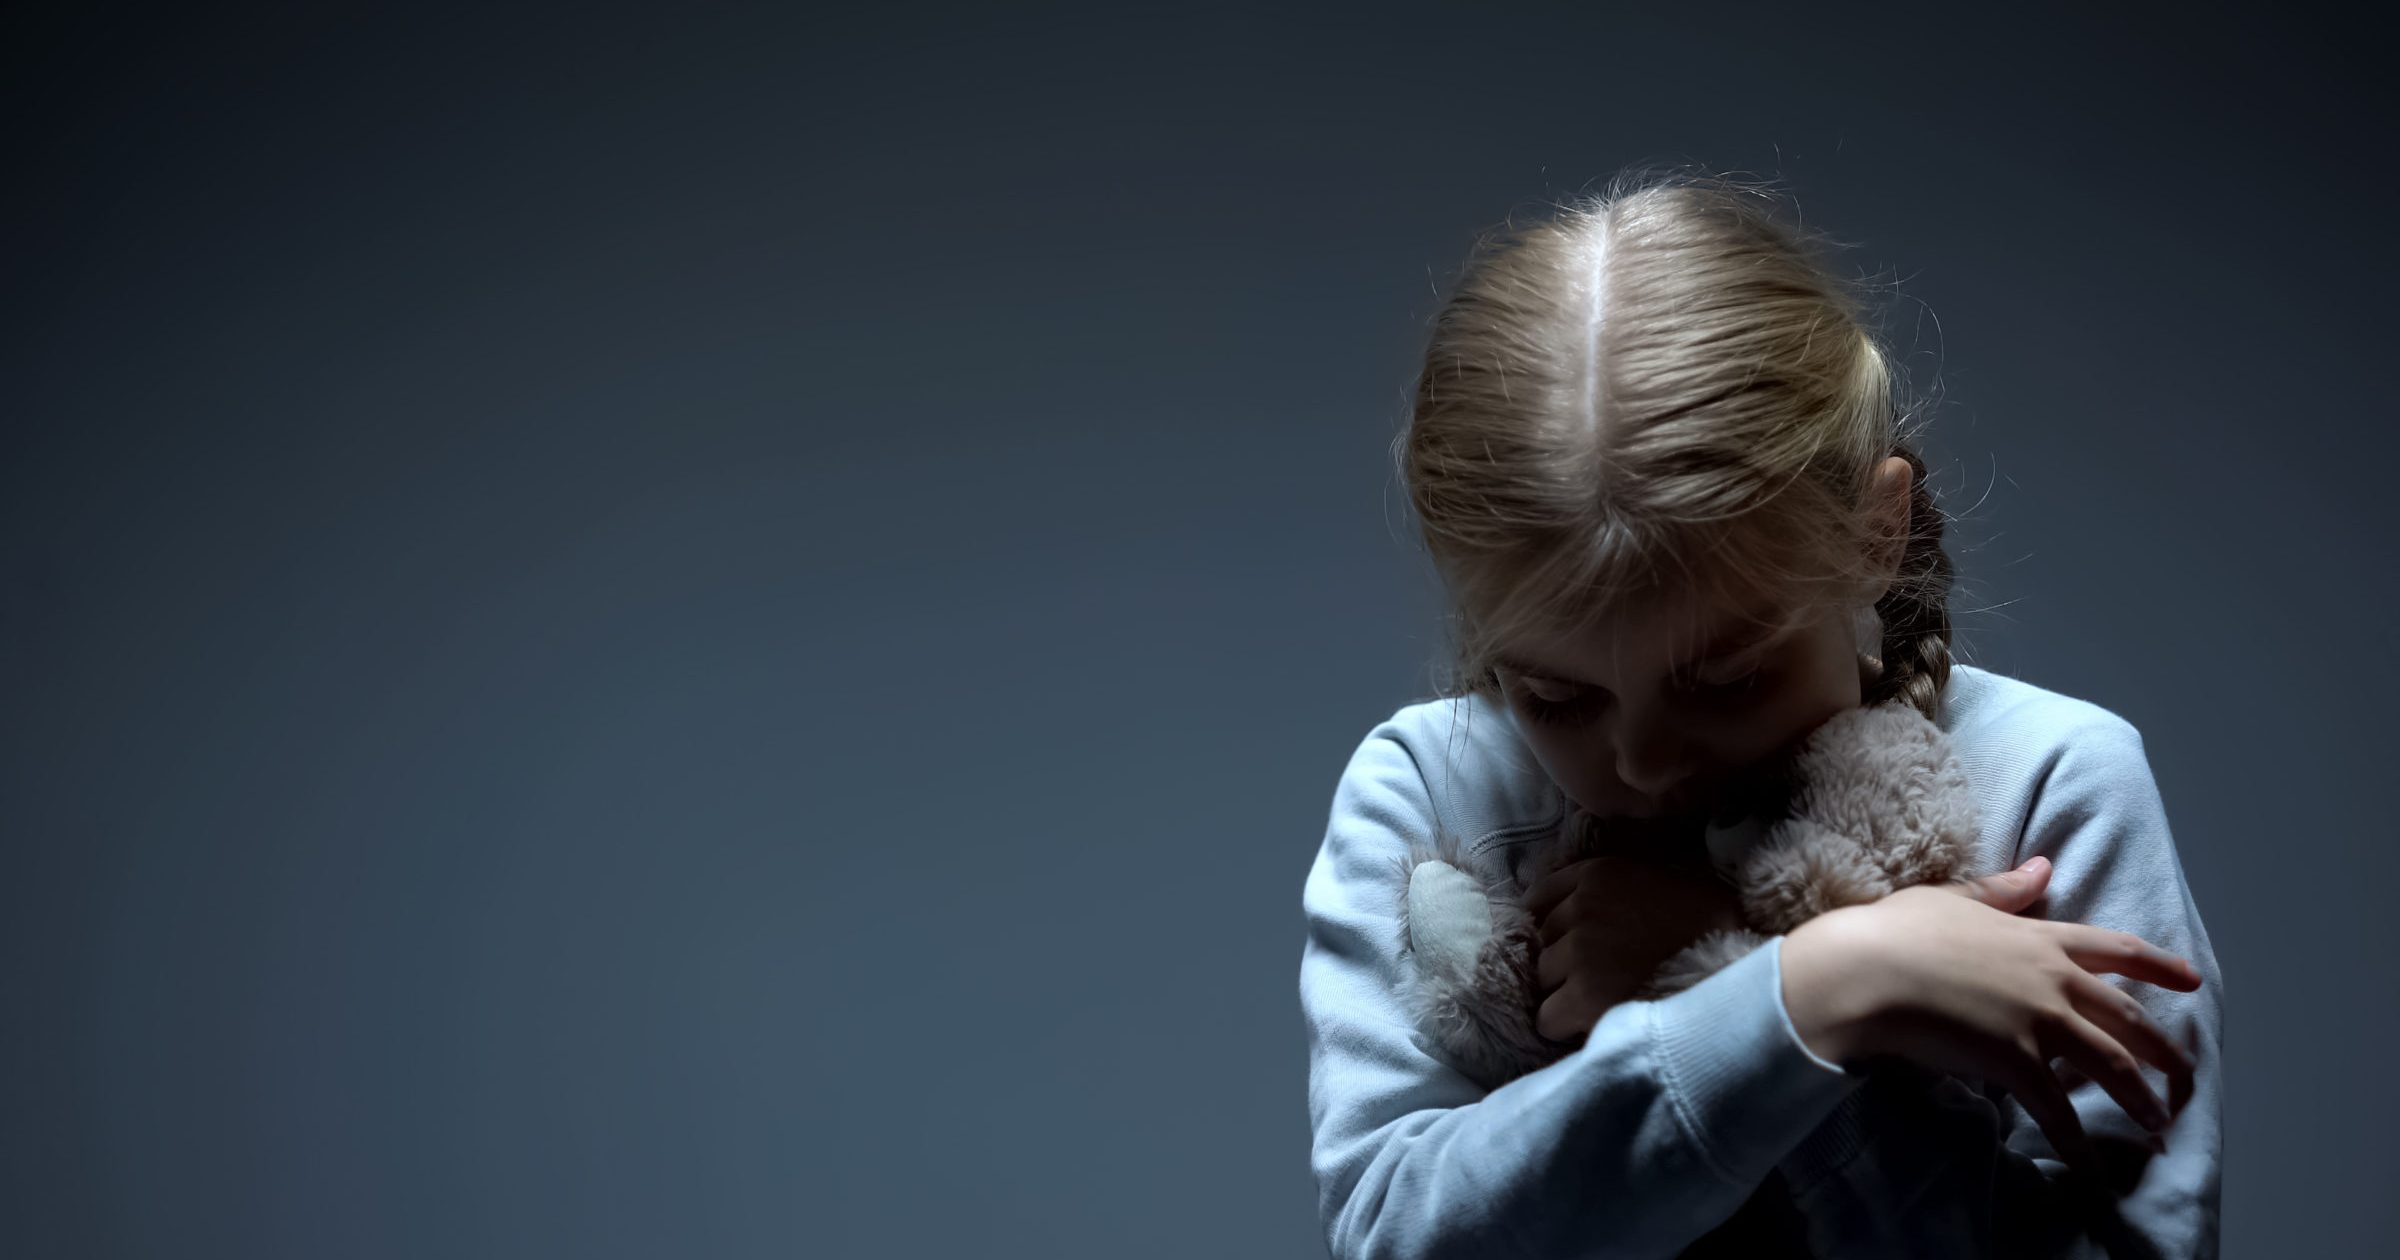 Lonely little child hugging teddy bear, bullying concept, dark background